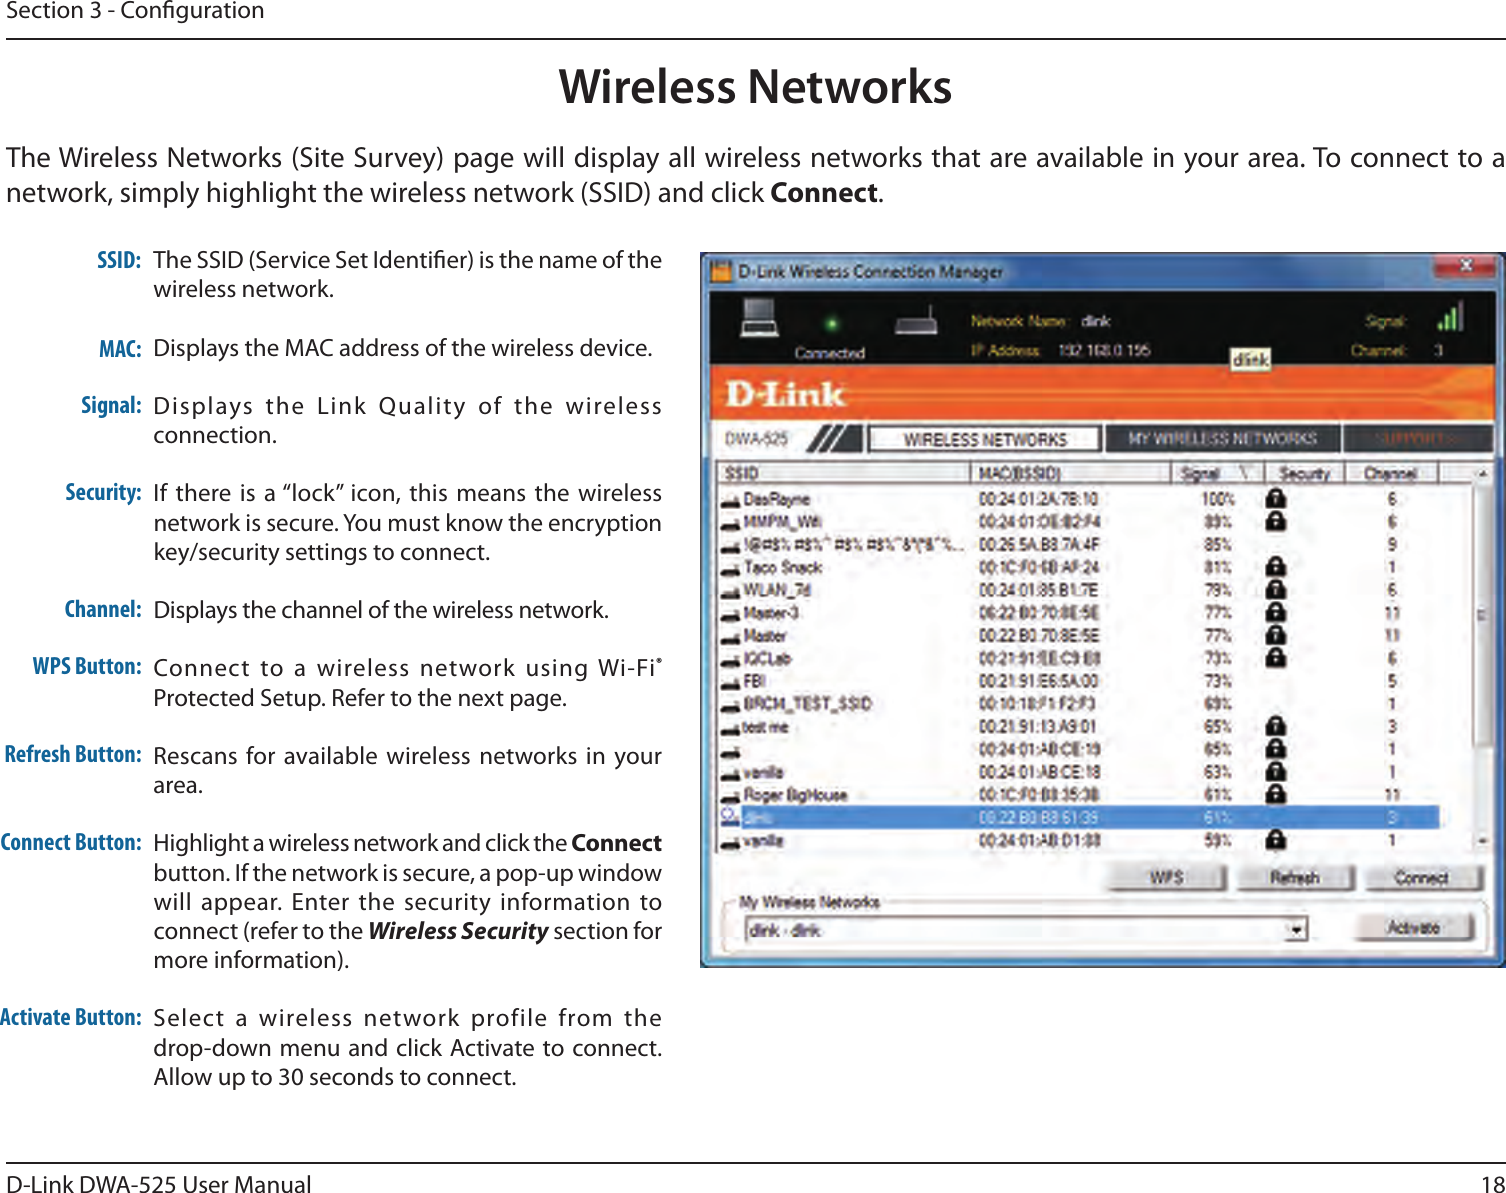 18D-Link DWA-525 User ManualSection 3 - CongurationWireless NetworksTheWirelessNetworks(SiteSurvey)pagewilldisplayallwirelessnetworksthatareavailableinyourarea.Toconnecttoanetwork,simplyhighlightthewirelessnetwork(SSID)andclickConnect.TheSSID(ServiceSetIdentier)isthenameofthewireless network.Displays the MAC address of the wireless device.Displays  the  Link  Quality  of  the  wireless connection. Ifthereisa“lock”icon,thismeans the wirelessnetwork is secure. You must know the encryption key/security settings to connect.Displays the channel of the wireless network.Connect to a wireless network  using Wi-Fi® Protected Setup. Refer to the next page.Rescans for available wireless networks in  your area.Highlight a wireless network and click the Connect button.Ifthenetworkissecure,apop-upwindowwill appear.  Enter the  security information to connect(refertotheWireless Security section for moreinformation).Select  a  wireless  network profile  from  the  drop-down menu and click Activate to connect. Allow up to 30 seconds to connect.MAC:SSID:Channel:Signal:Security:Refresh Button:Connect Button:Activate Button:WPS Button: